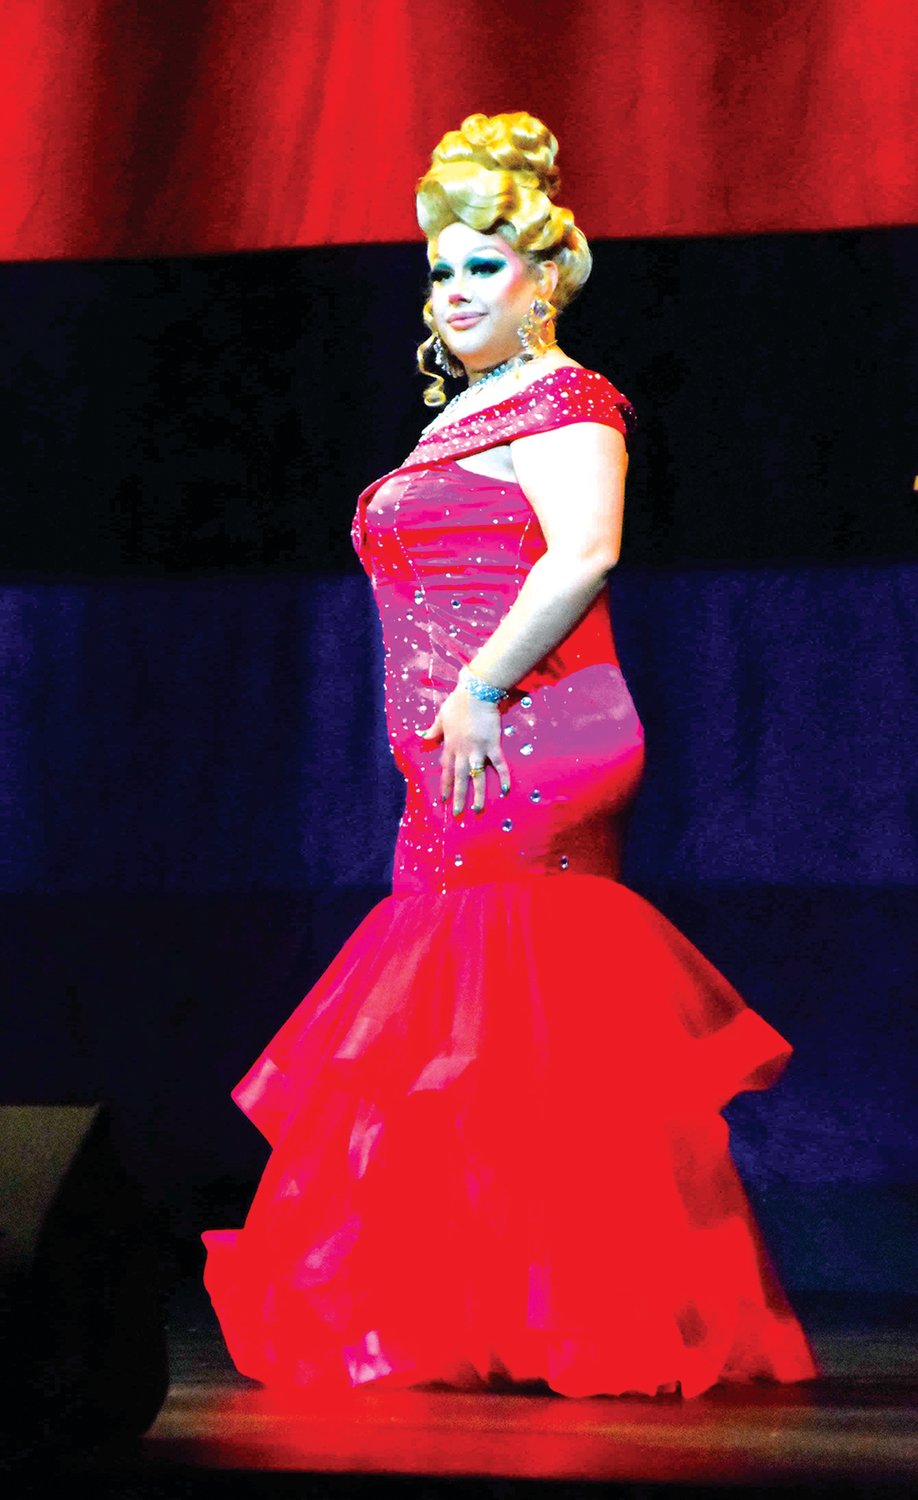 A Pride Pageant contestant competes in the formal wear category.